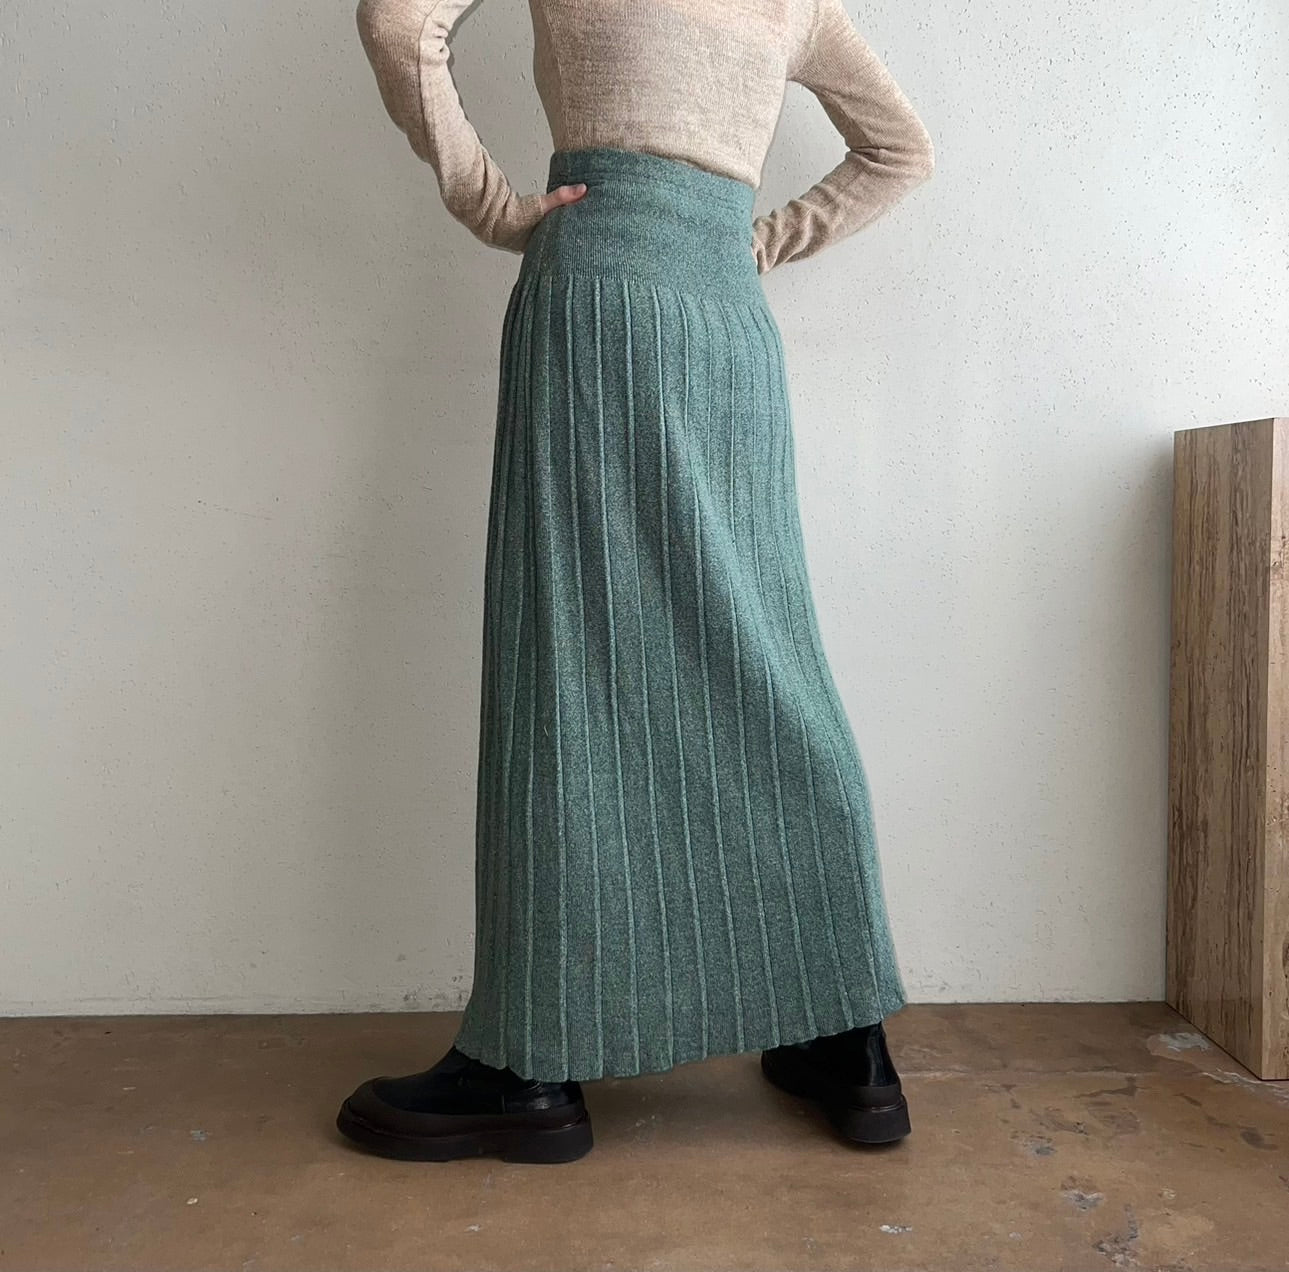 90s Cotton Knit Skirt Made in USA